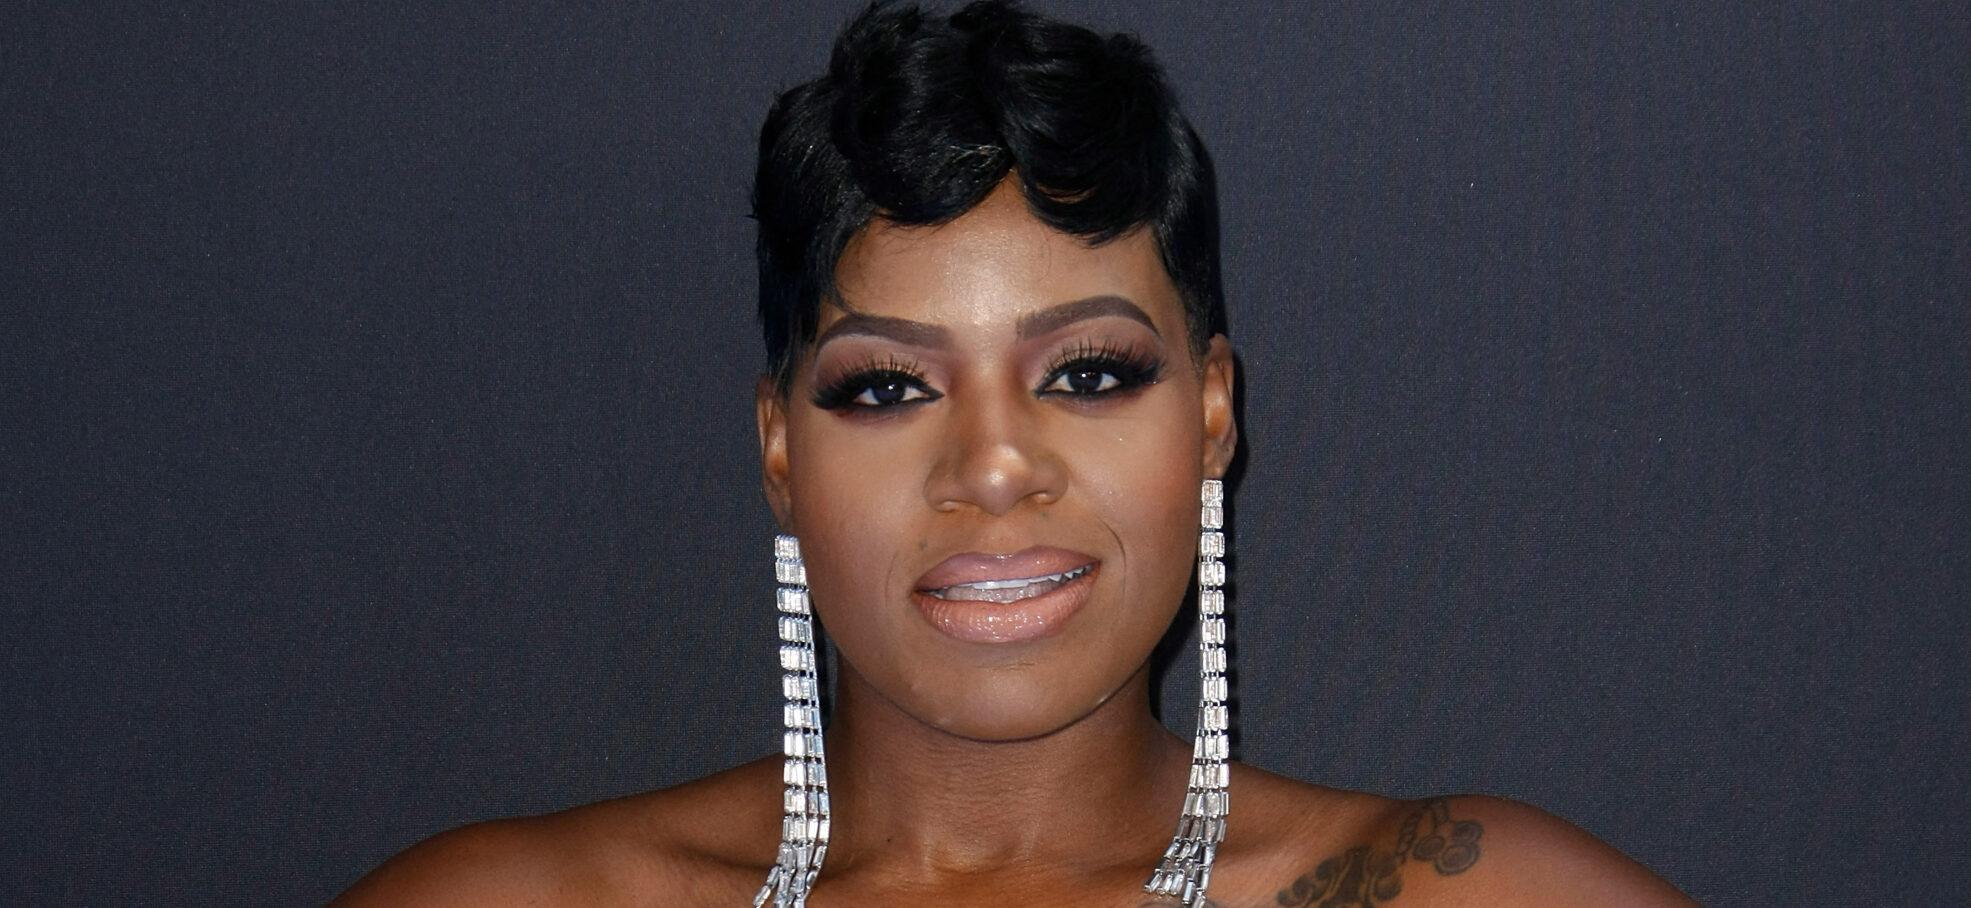 Fantasia Slams Airbnb Host For ‘Trying To Kick My Kids And I Out At 12:00 Midnight’